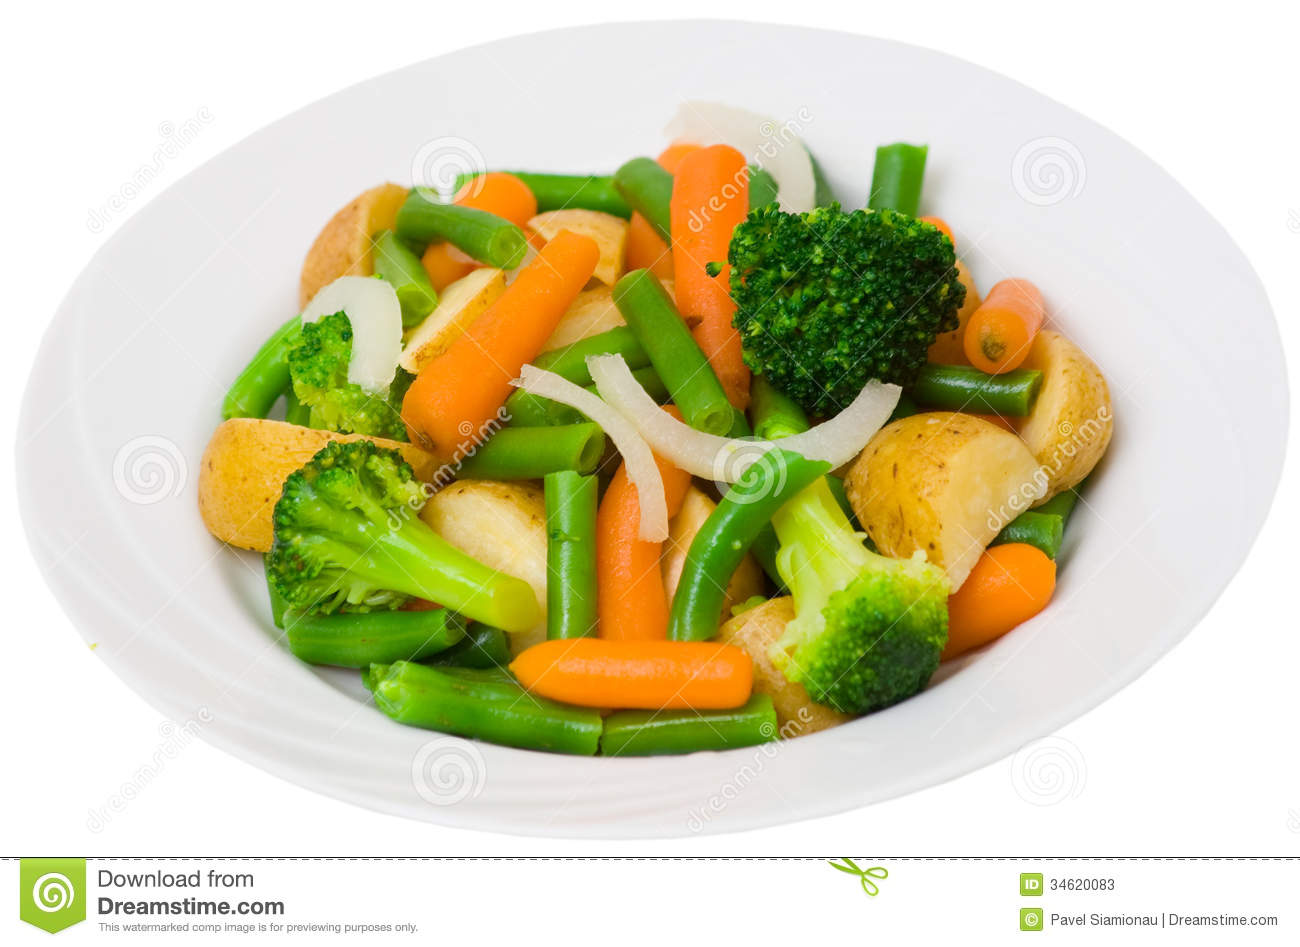 Mixed Vegetables On A Plate Stock Photos   Image  34620083